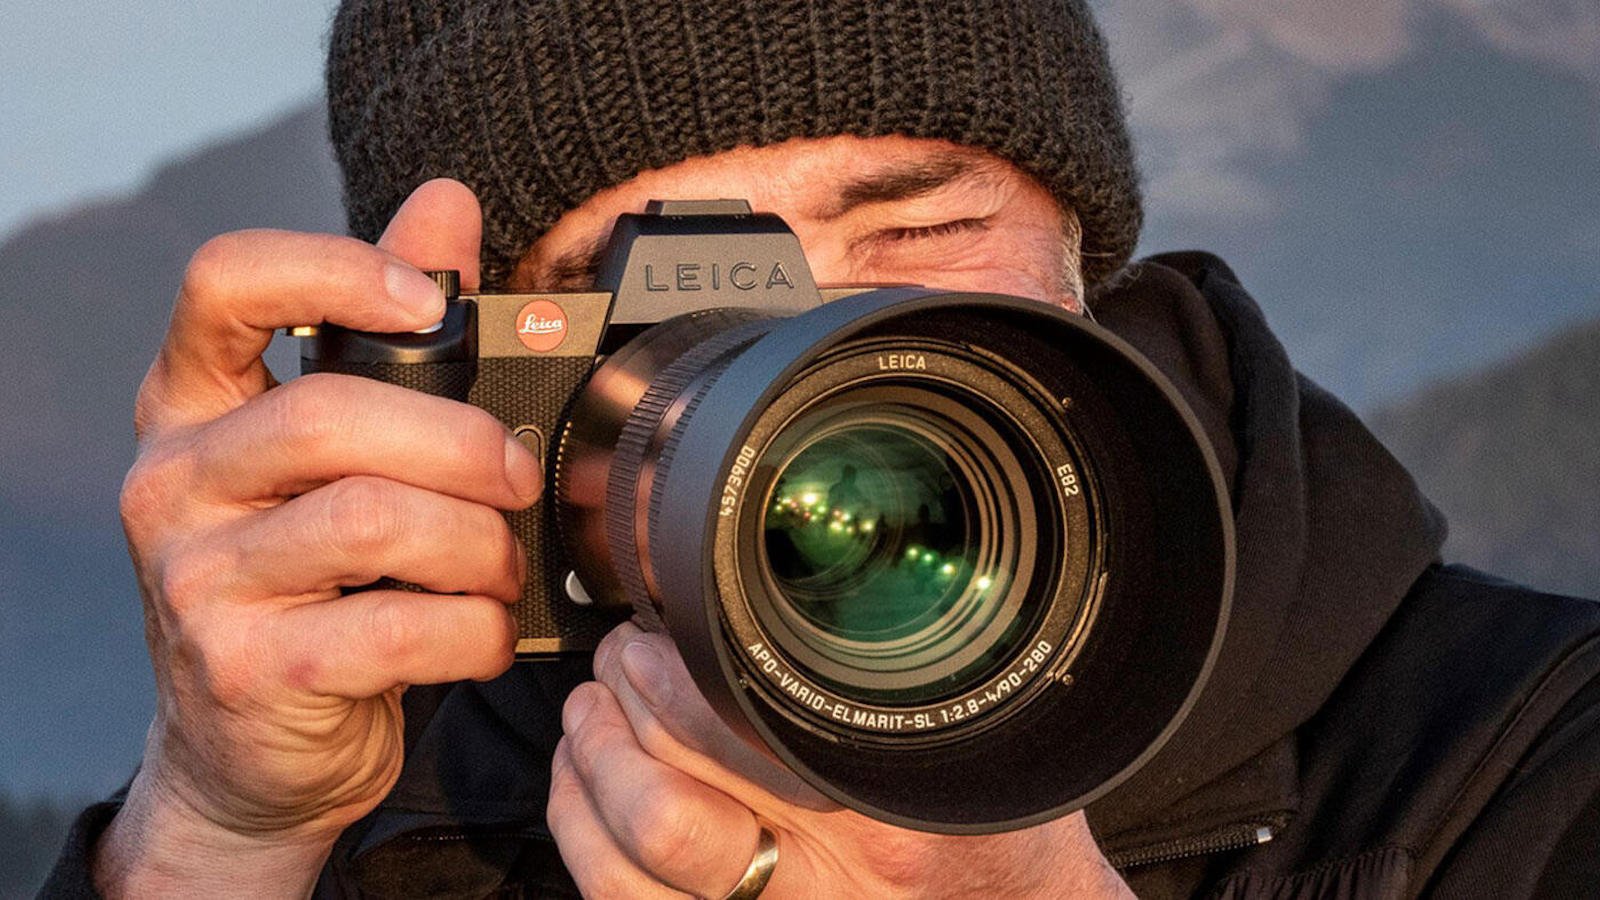 Leica SL2-S photo and video camera features fast and reliable focusing